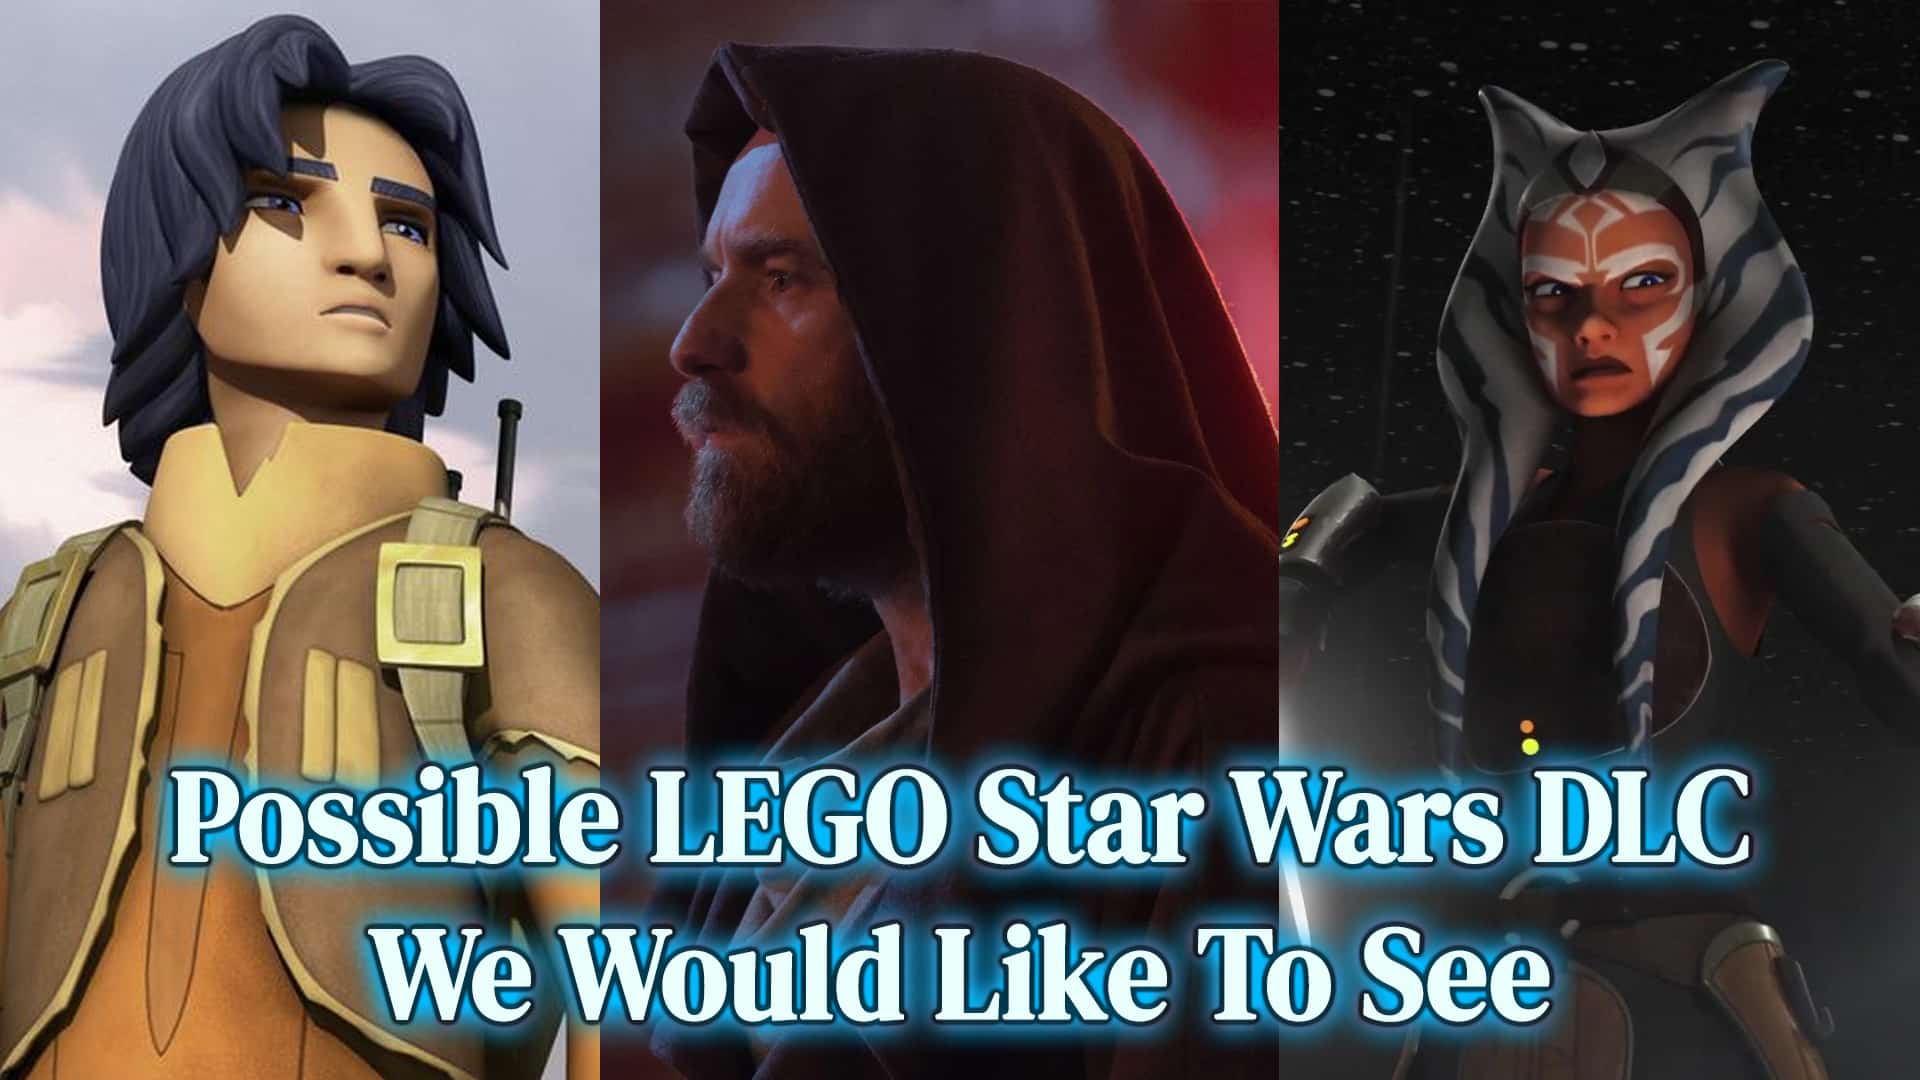 7 Possible Expansions We Could See In LEGO Star Wars: The Skywalker Saga DLC